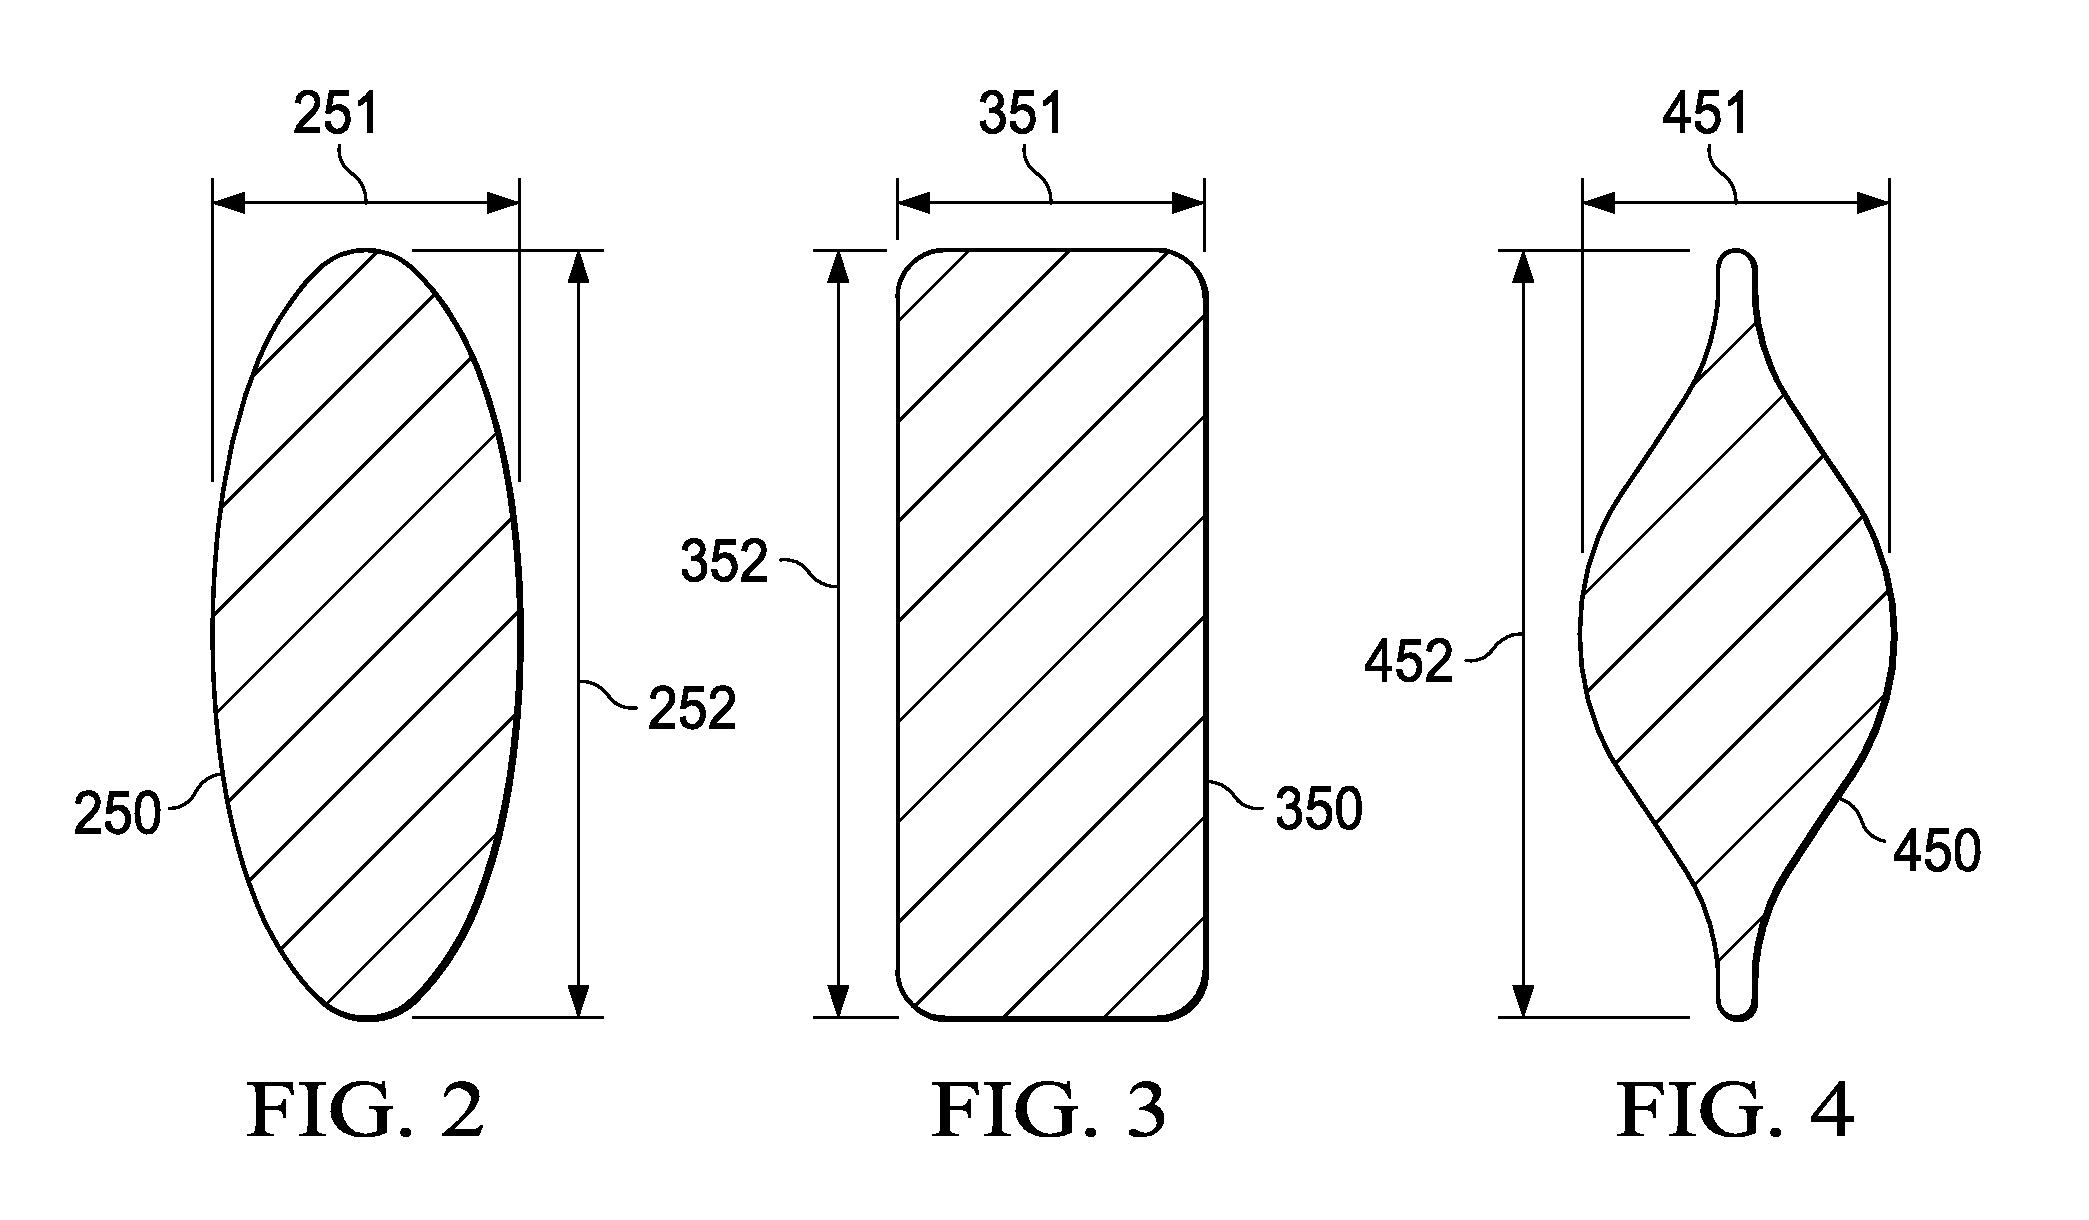 Semiconductor Flip-Chip System Having Oblong Connectors and Reduced Trace Pitches